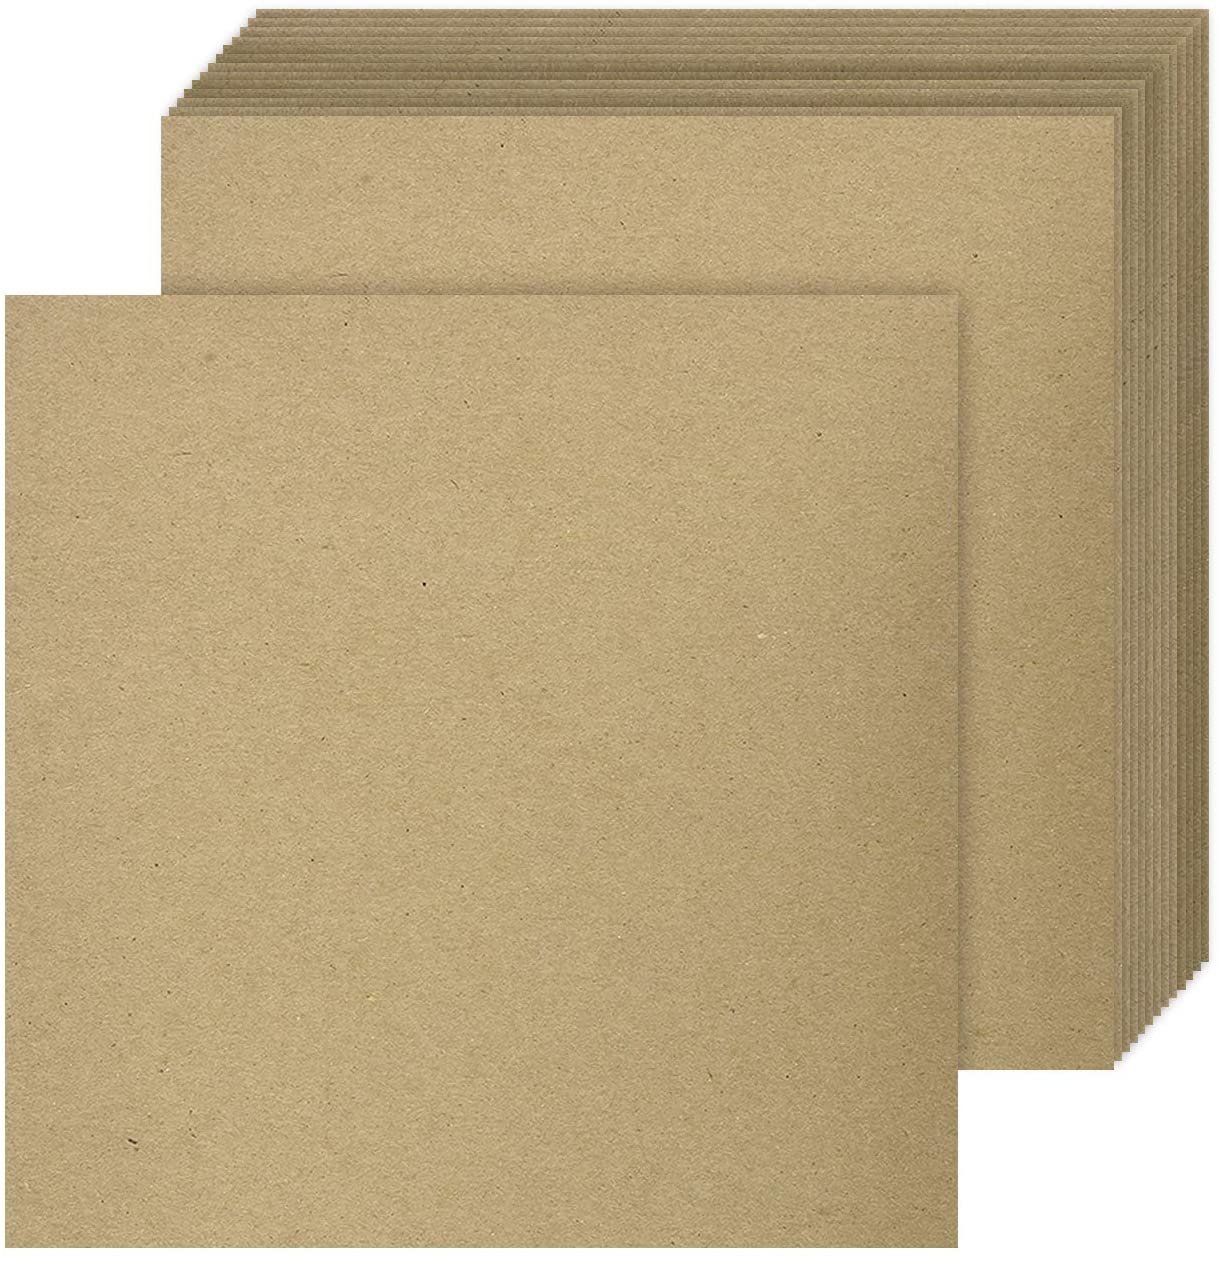 5 x 5 Square Brown Chipboard – Medium Weight 30 Point Thick Cardboard |  Hardboard, Custom, Product and Environmentally Friendly Packaging Boxes |  25